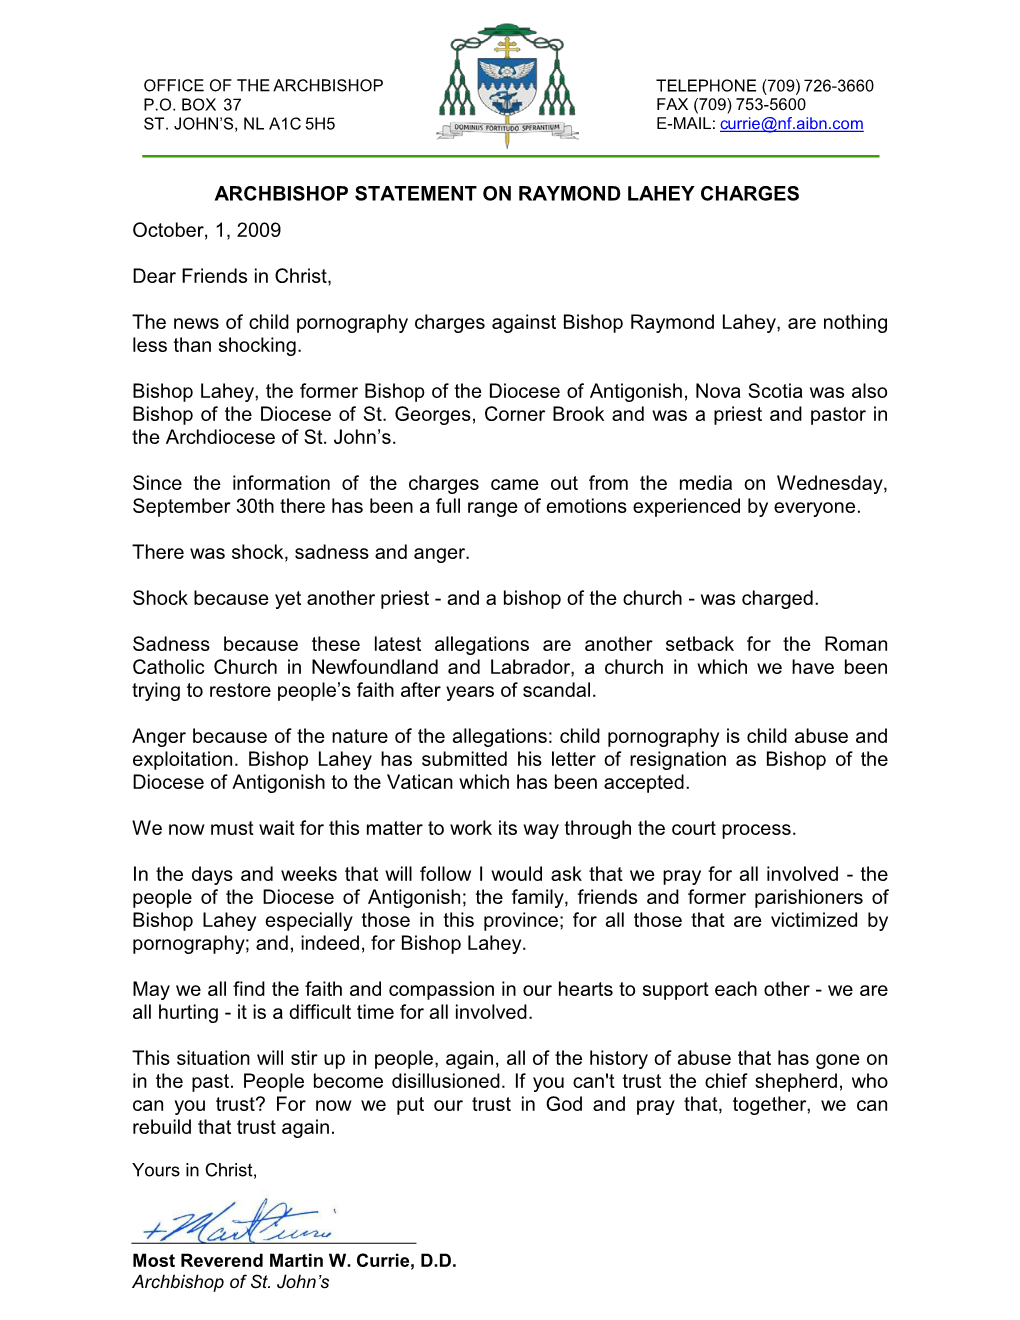 ARCHBISHOP STATEMENT on RAYMOND LAHEY CHARGES October, 1, 2009 Dear Friends in Christ, the News of Child Pornography Charges A